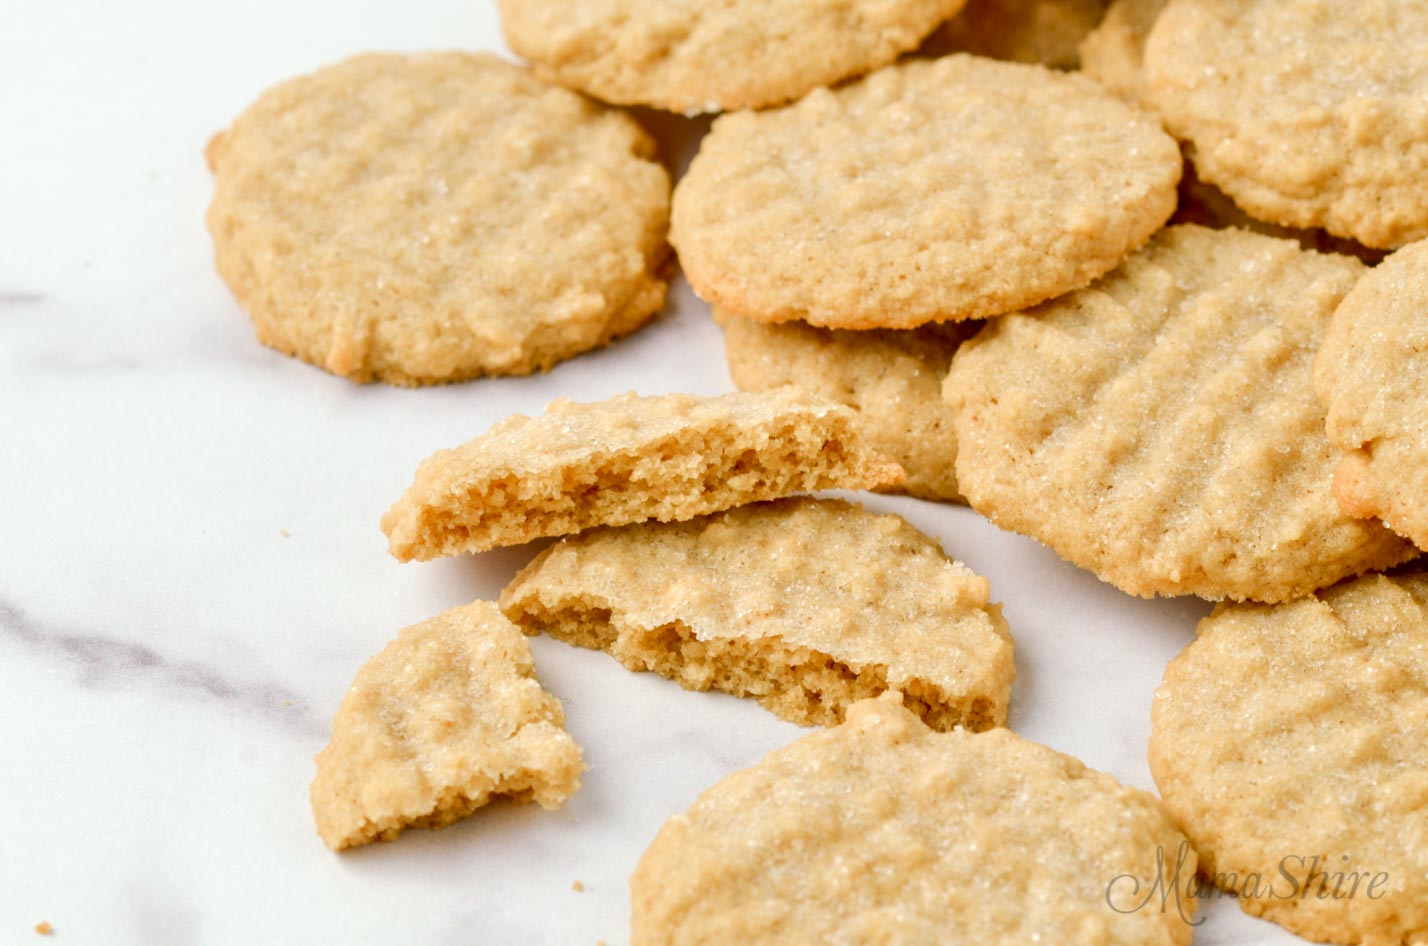 Freshly baked peanut butter cookies made with a gluten-free and dairy-free recipe.